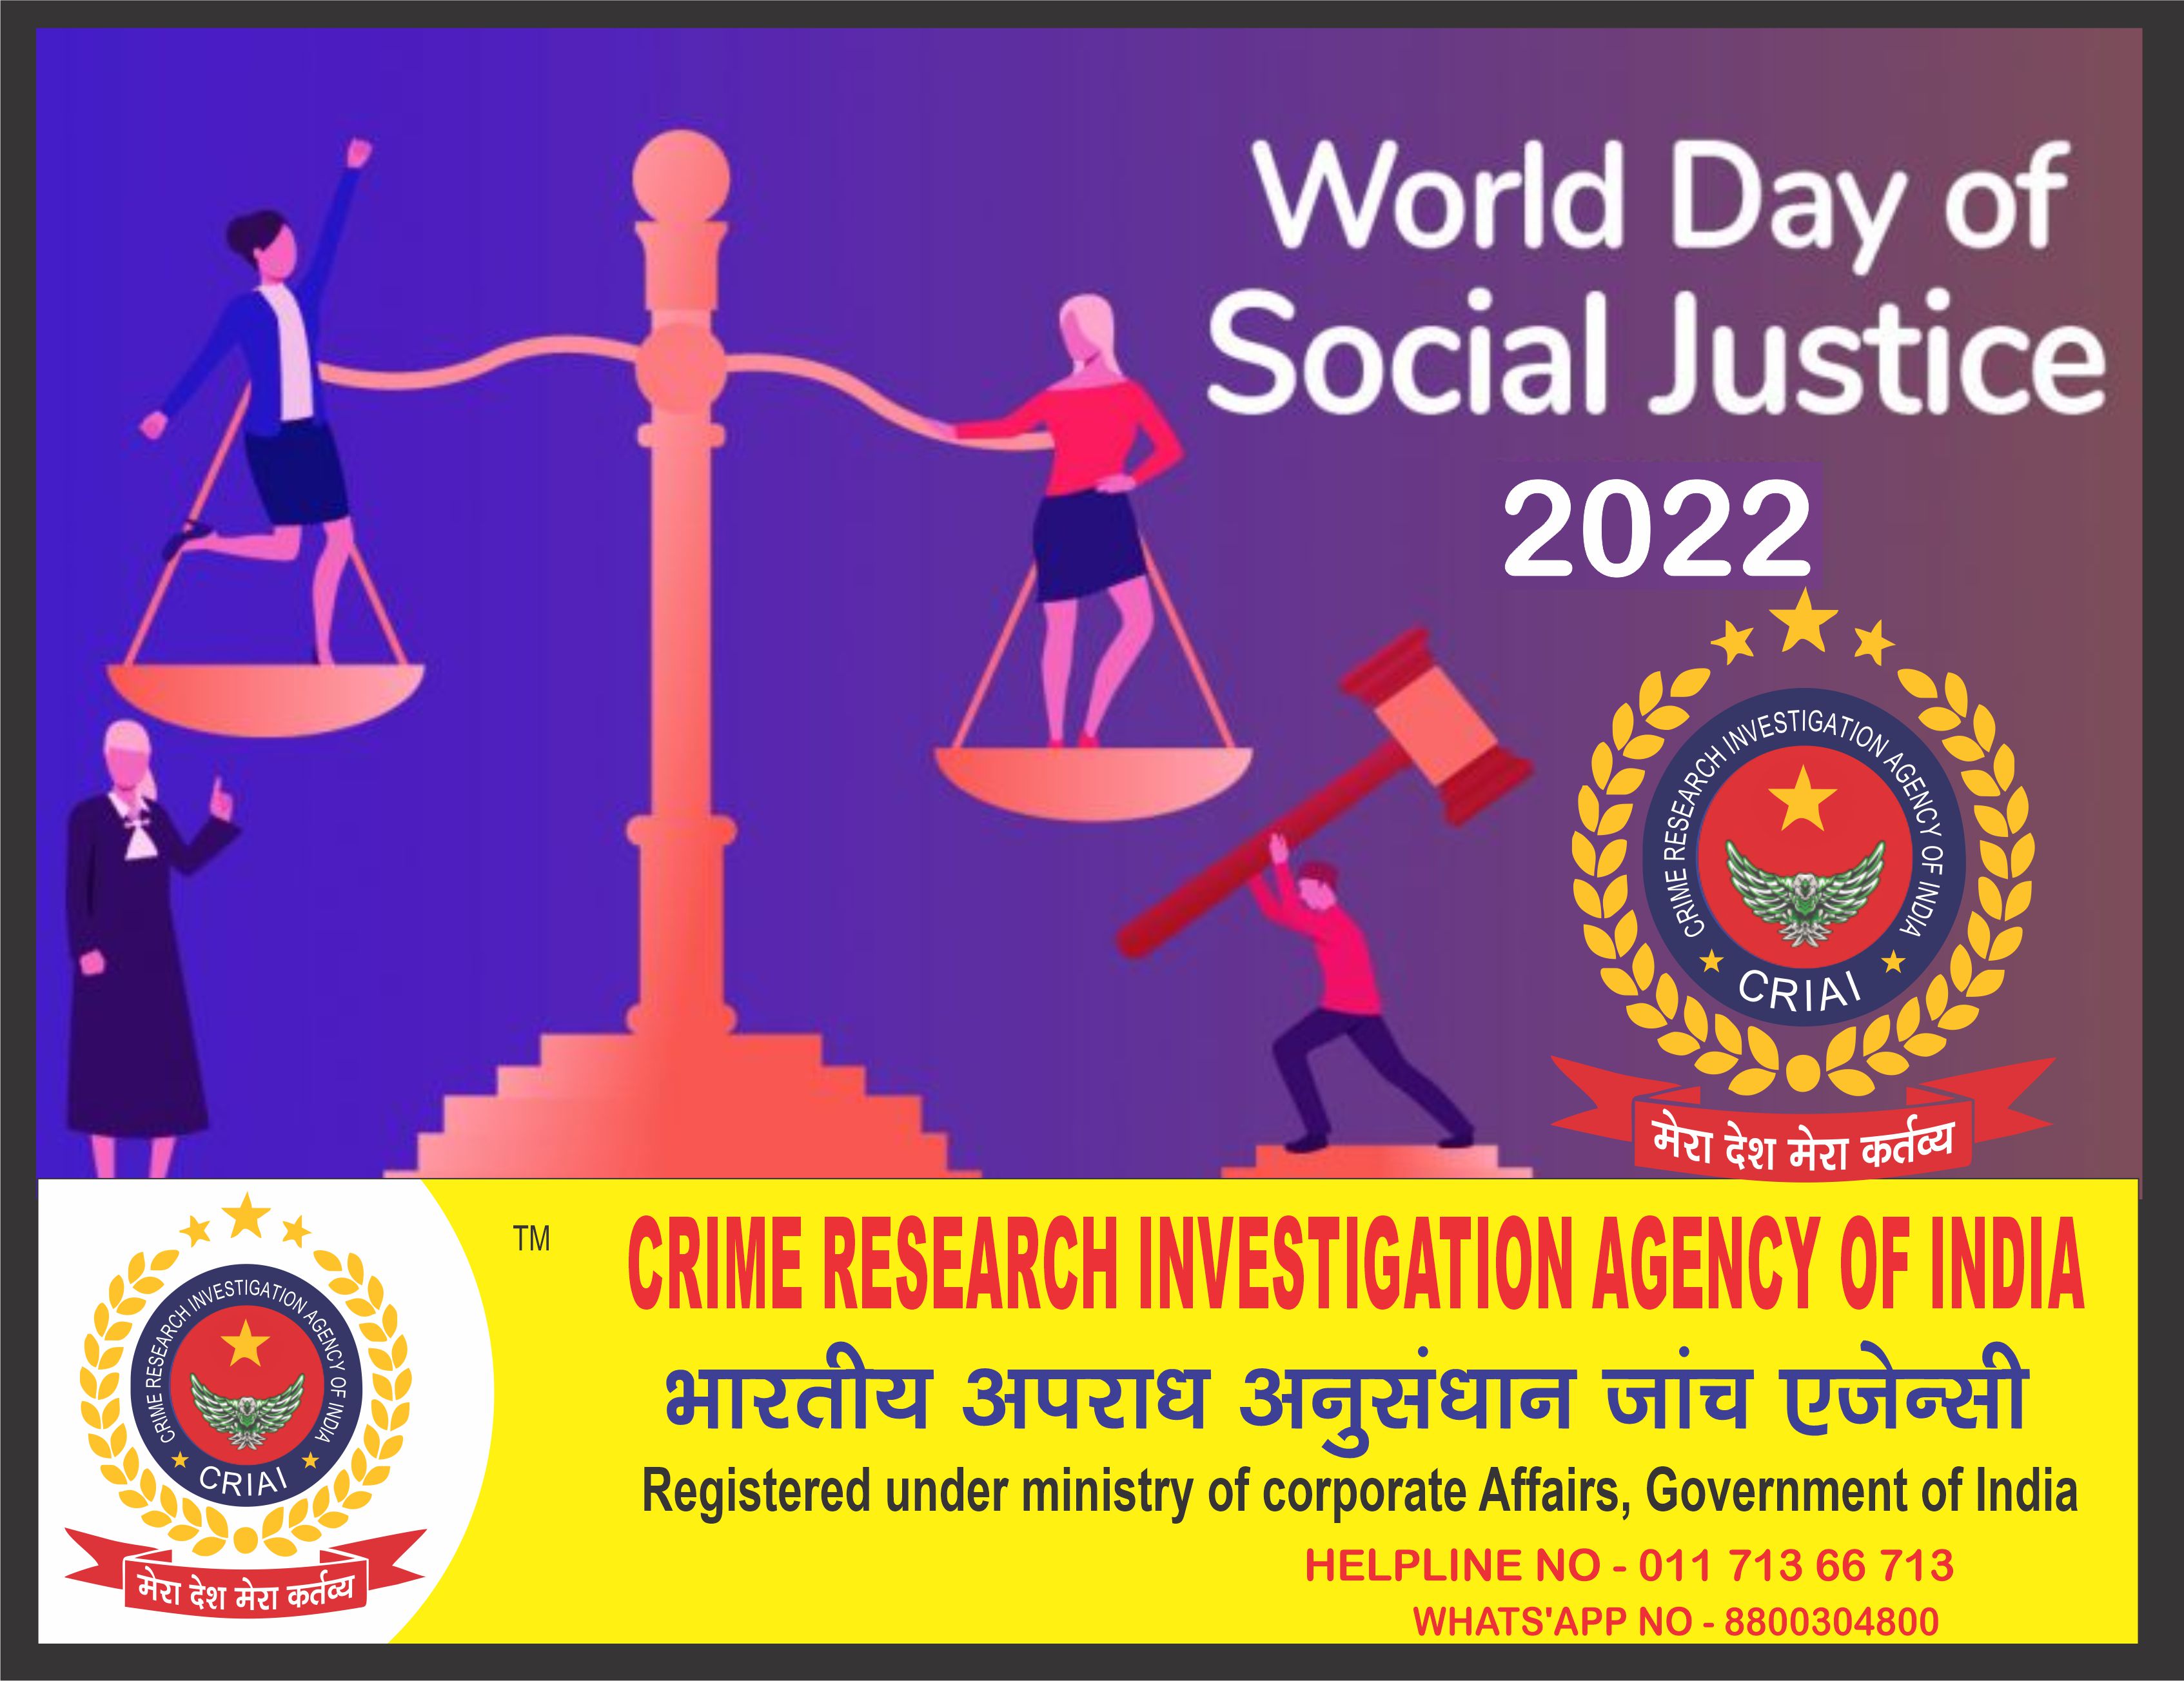 it-helps-us-see-light-whenever-we-are-faced-dark-movement-look-light-and-fight-justice-greetings-world-day-of-social-justice